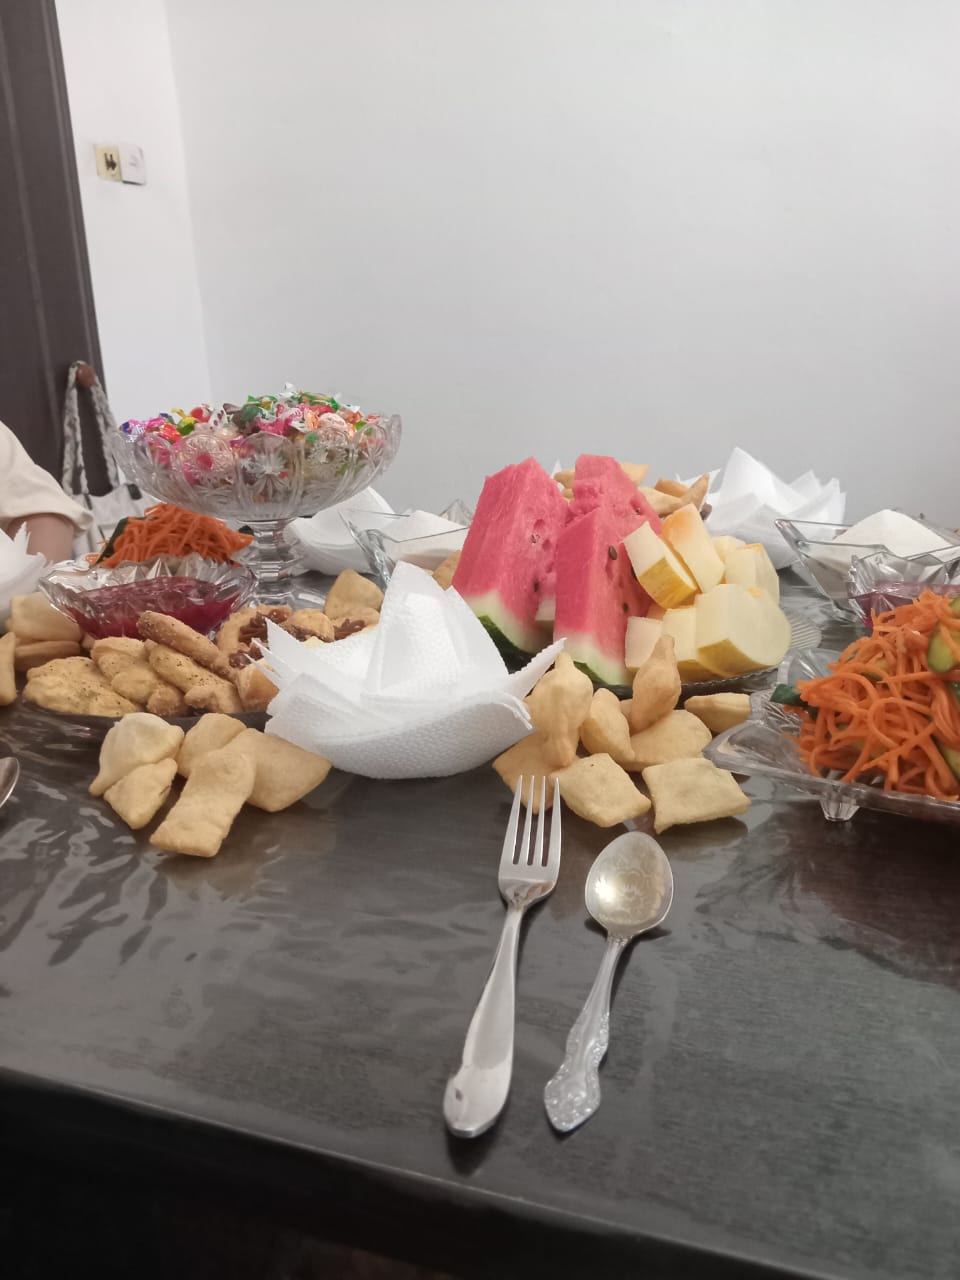 tabletop set with cutlery, napkins, sliced watermelon, melon, carrot and cucumber salad, candy, cookies and small pieces of fried bread